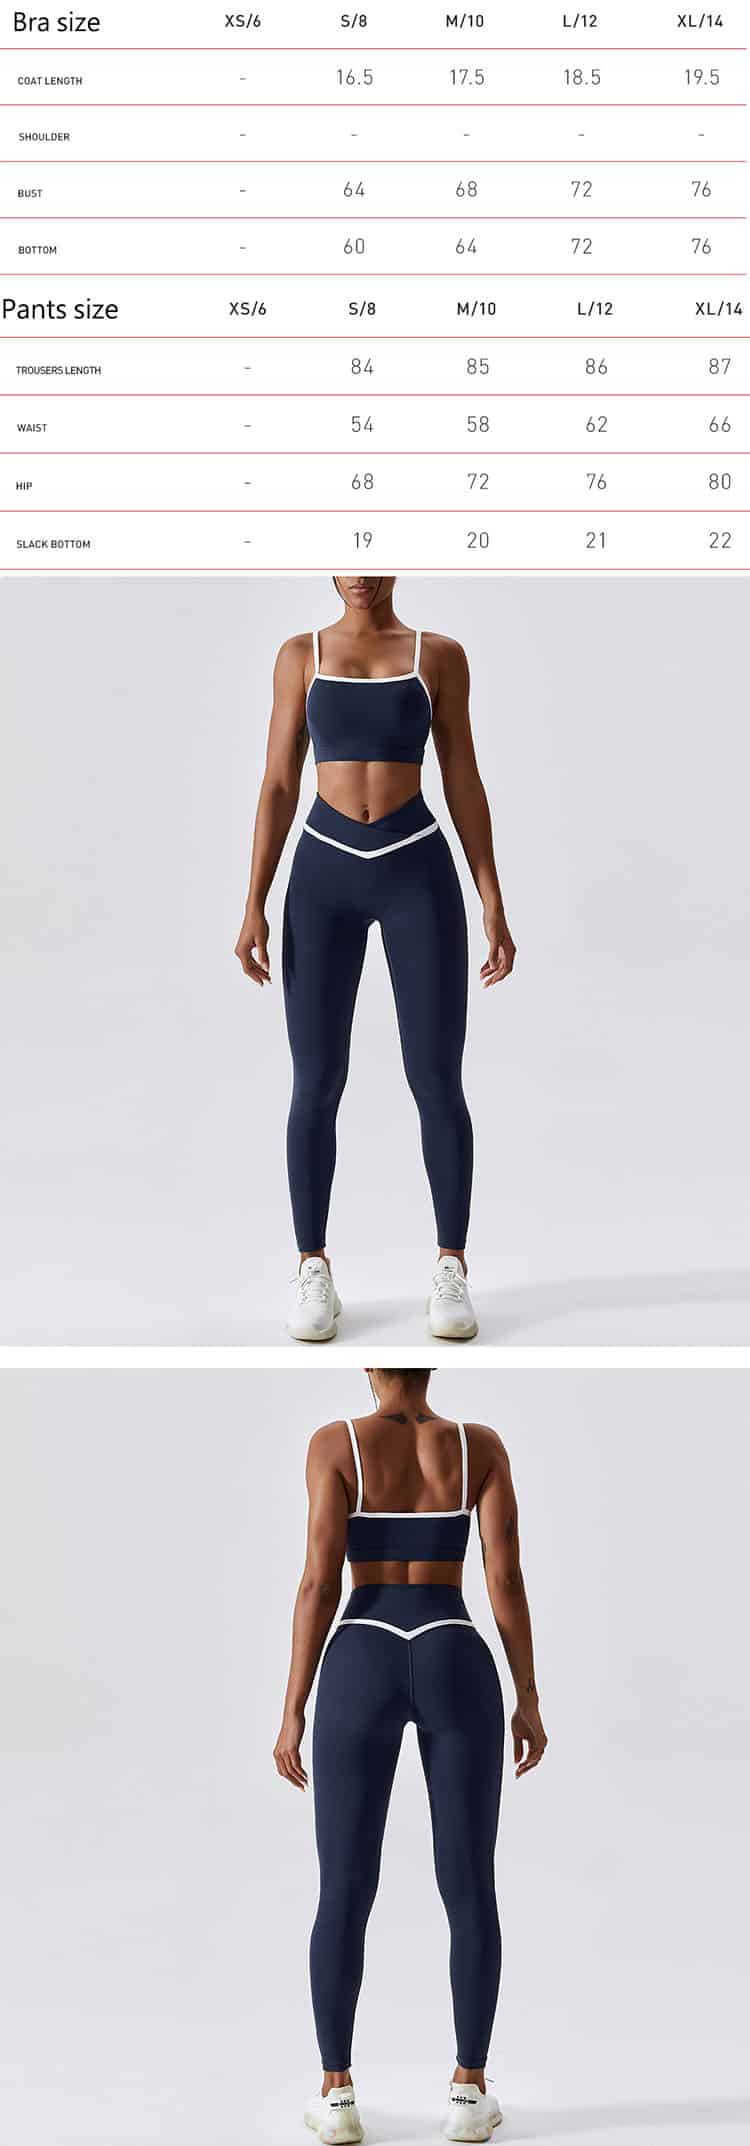 The be present yoga pants' color-contrast linear edge gives them an avant-garde